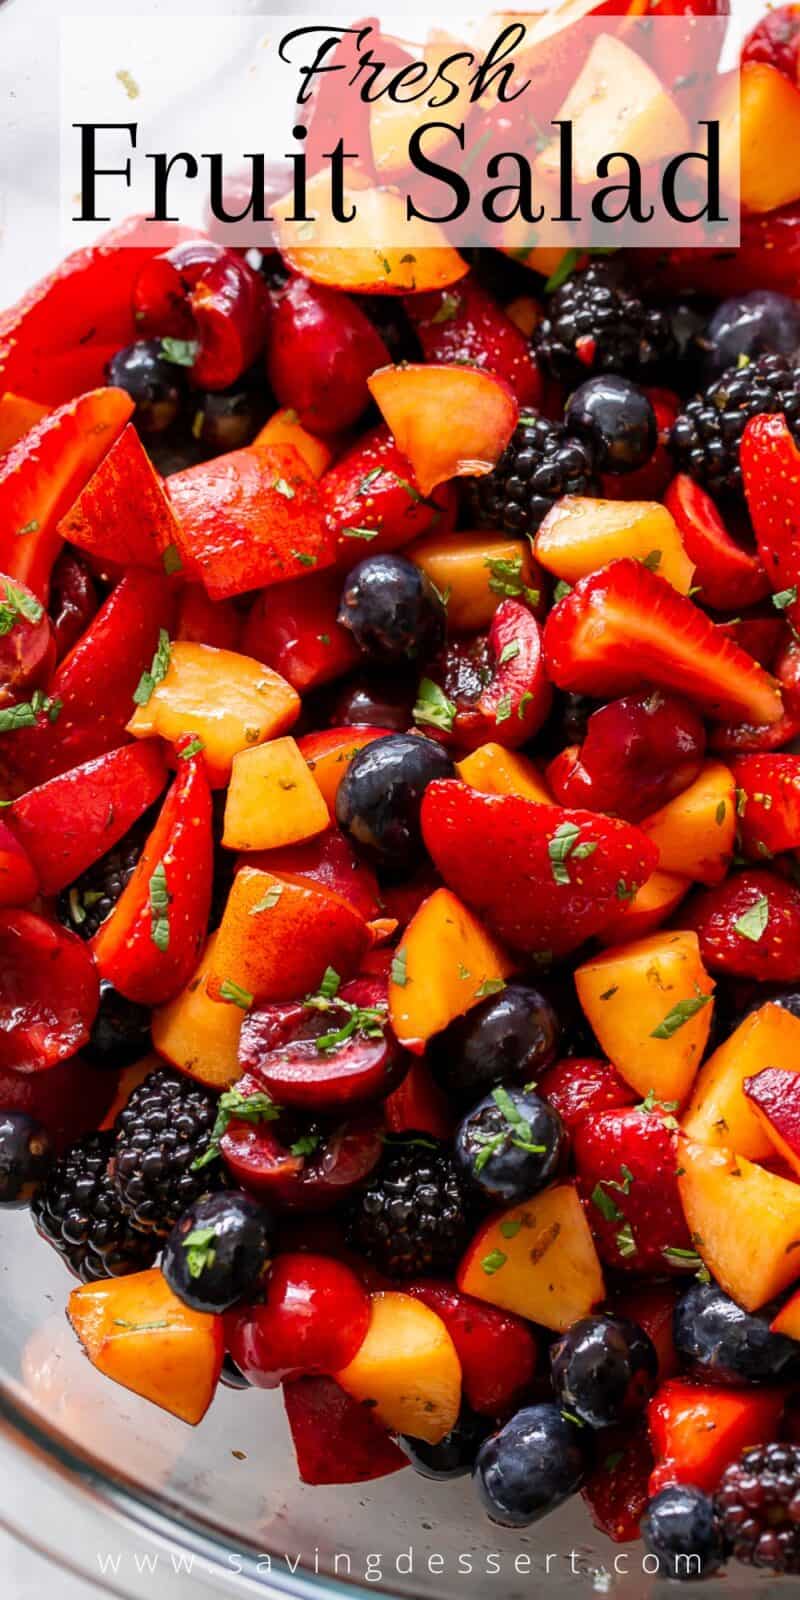 A closeup of a bowl of fresh fruit salad with cherries, blackberries, strawberries and blueberries